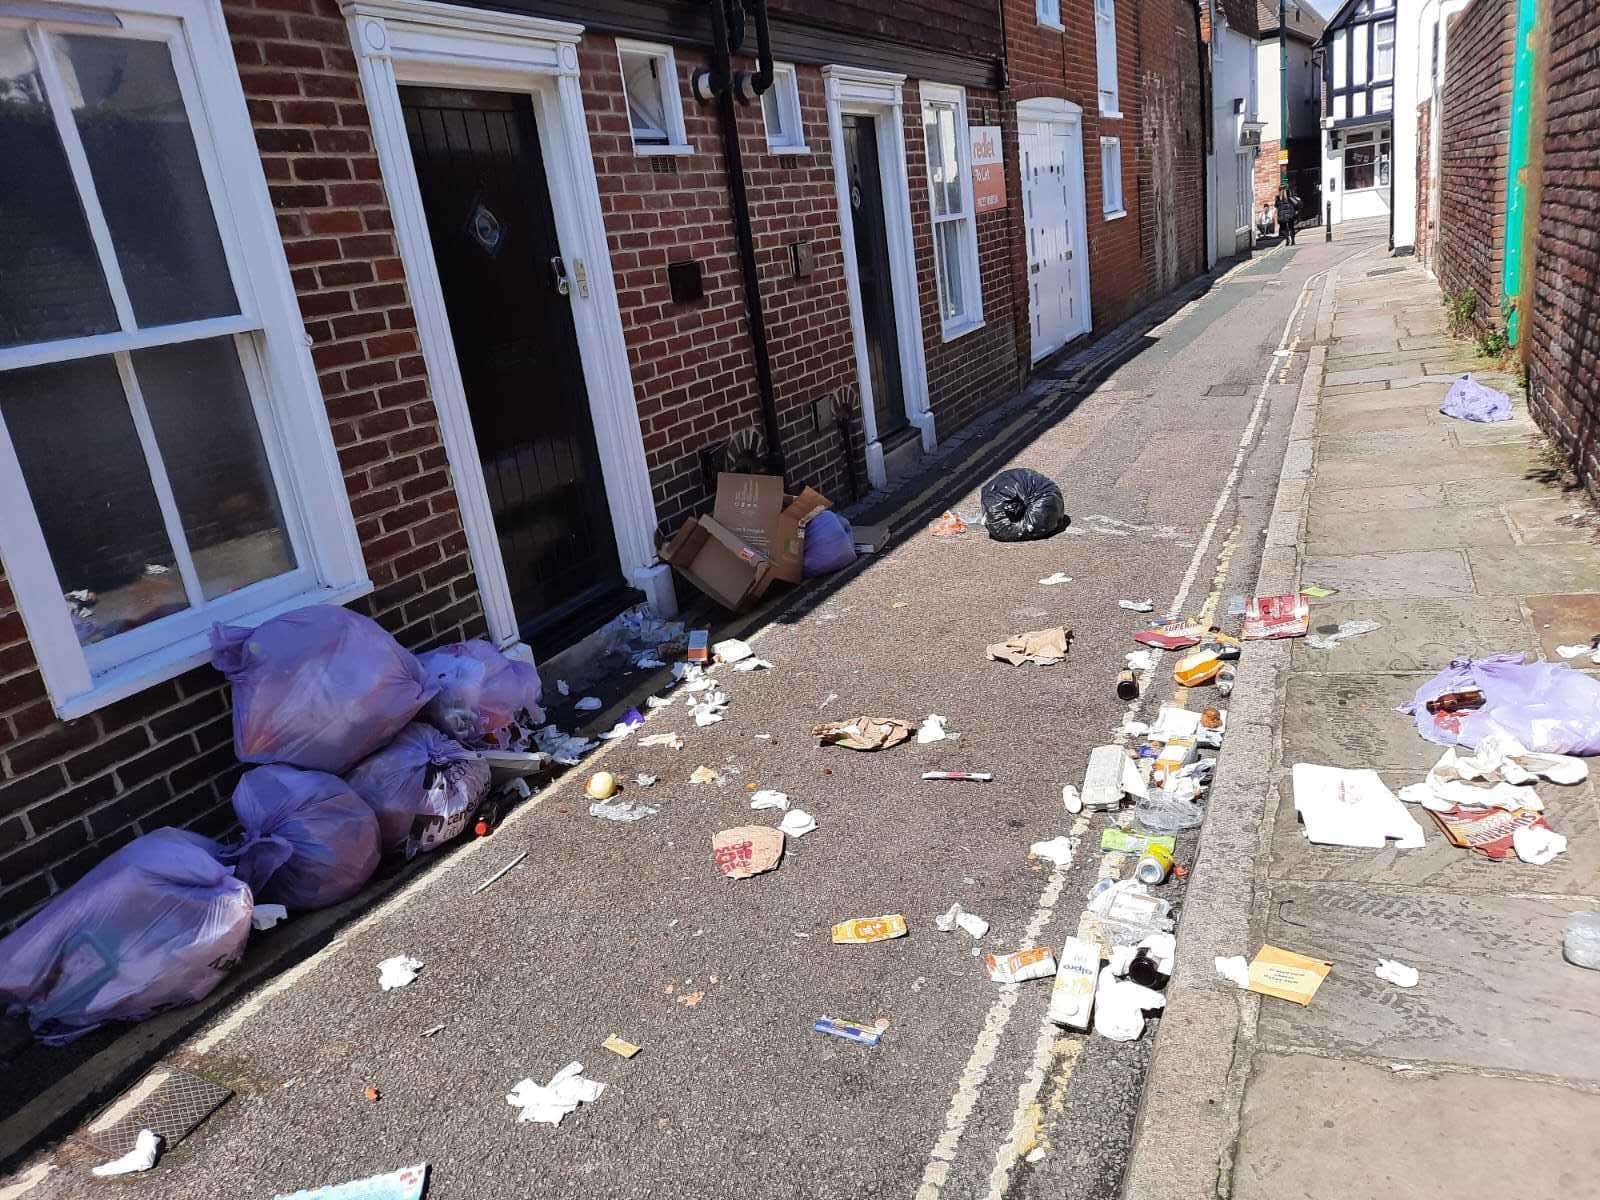 The rubbish left behind by students in High Street St Gregory's in Canterbury. Picture: Pat Gorman